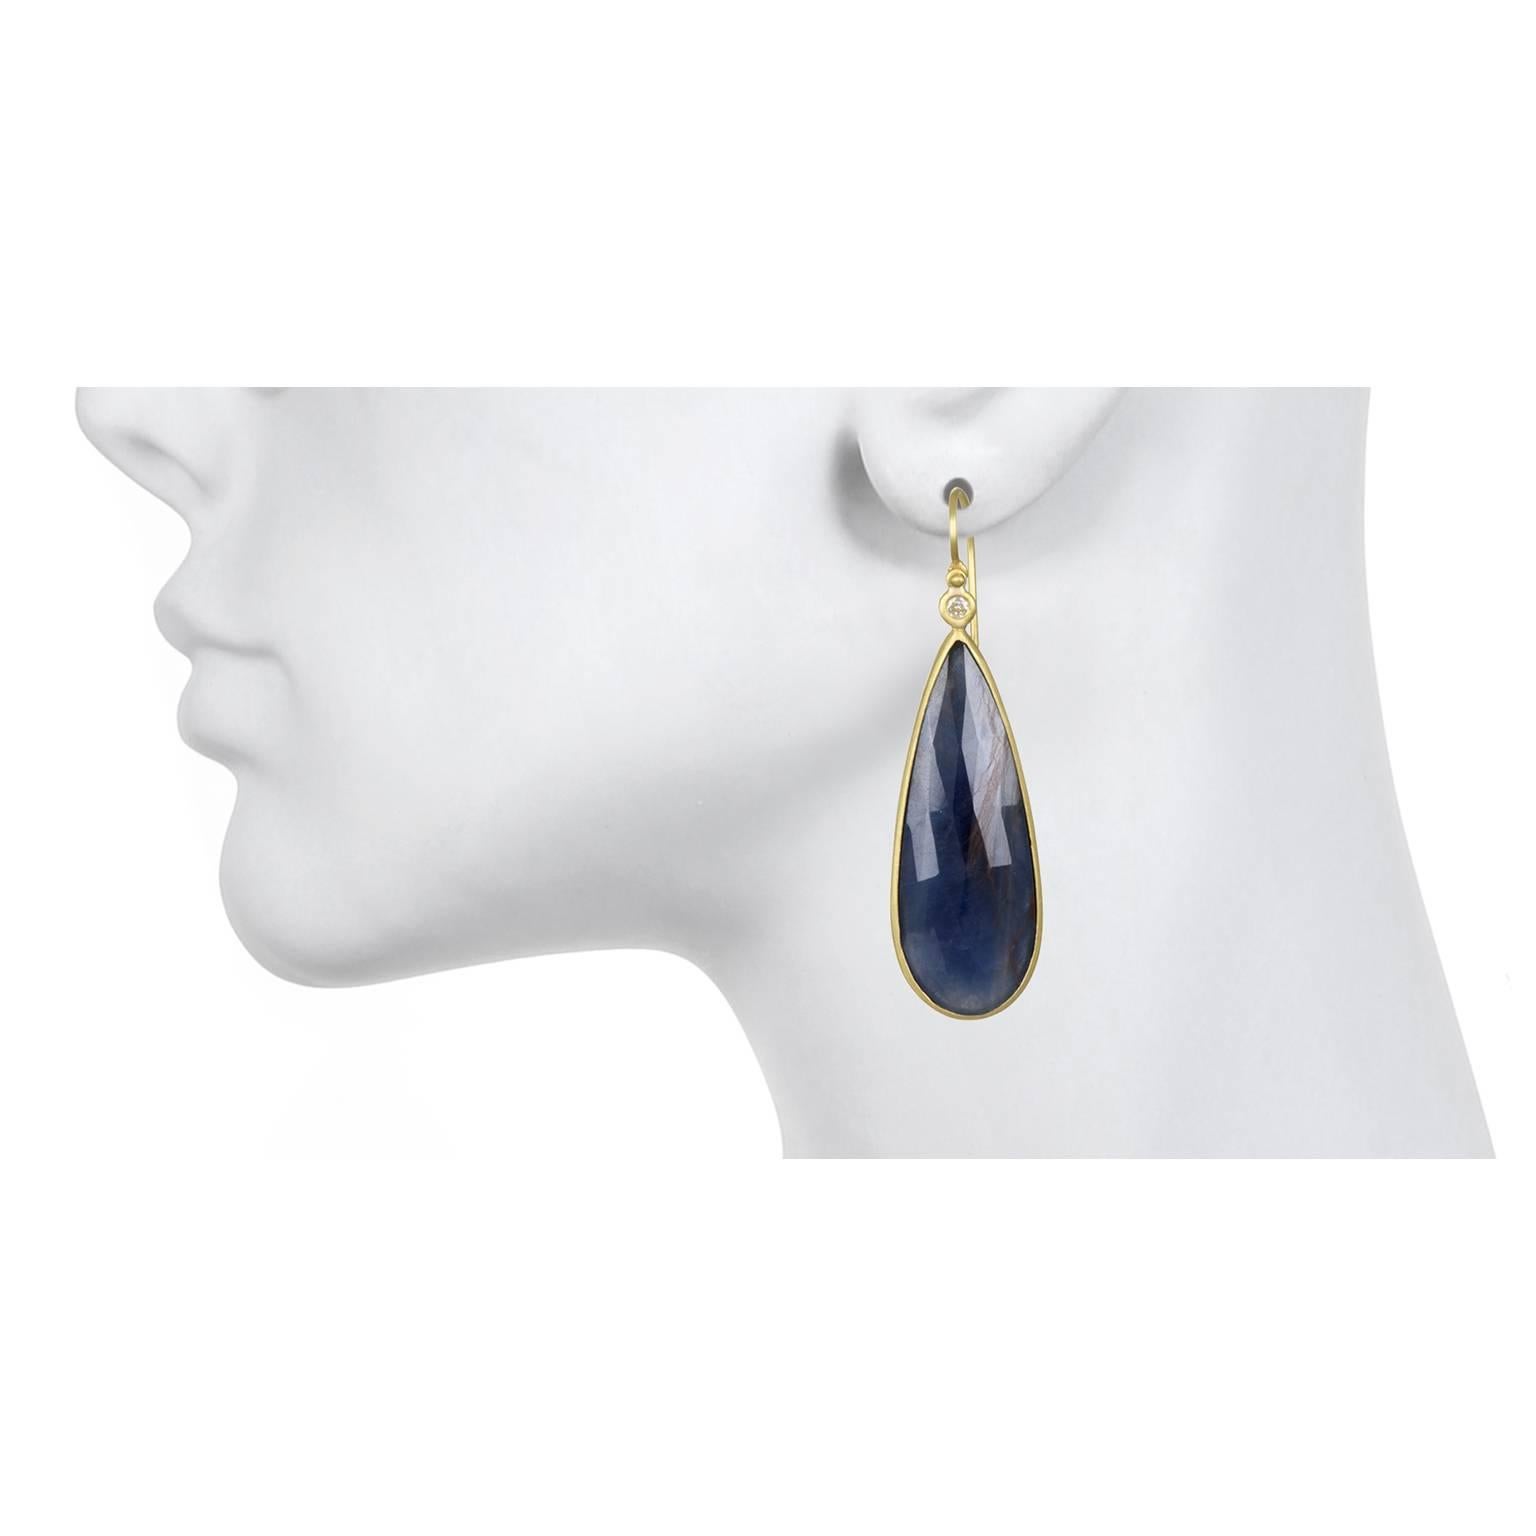 Handcrafted in 18k gold blue sapphire Tear Drop slices are bezel set and paired with bezel set round diamonds. The diamonds contrast and add a sparkle to the sapphire drop earrings. One of a kind.
Length: 1.75